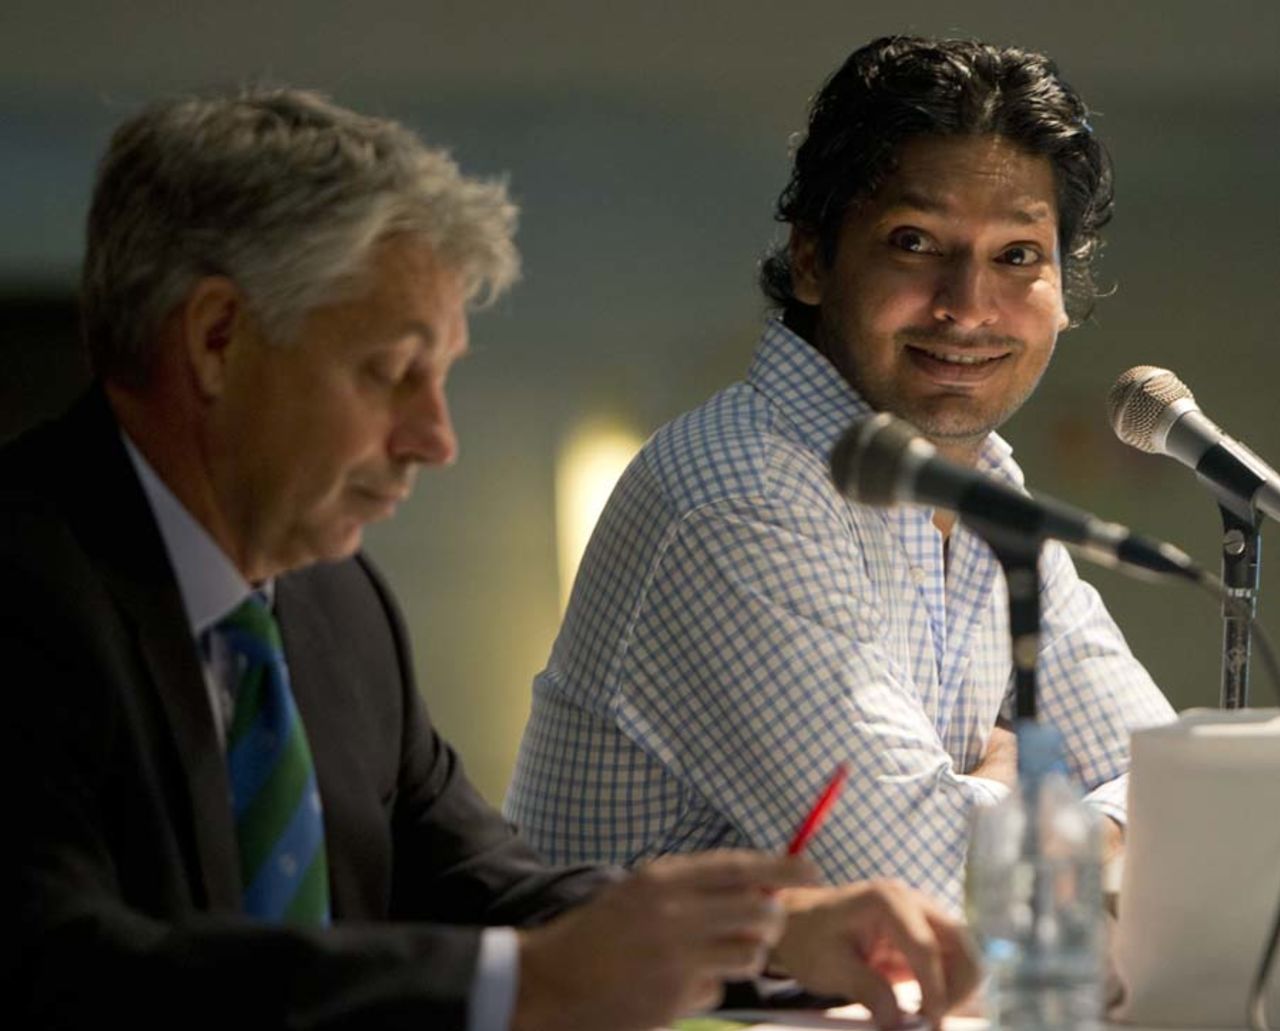 ICC Chief Executive Dave Richardson and Kumar Sangakkara at a press briefing to announce short-lists for ICC Awards 2012, Colombo, August 30, 2012